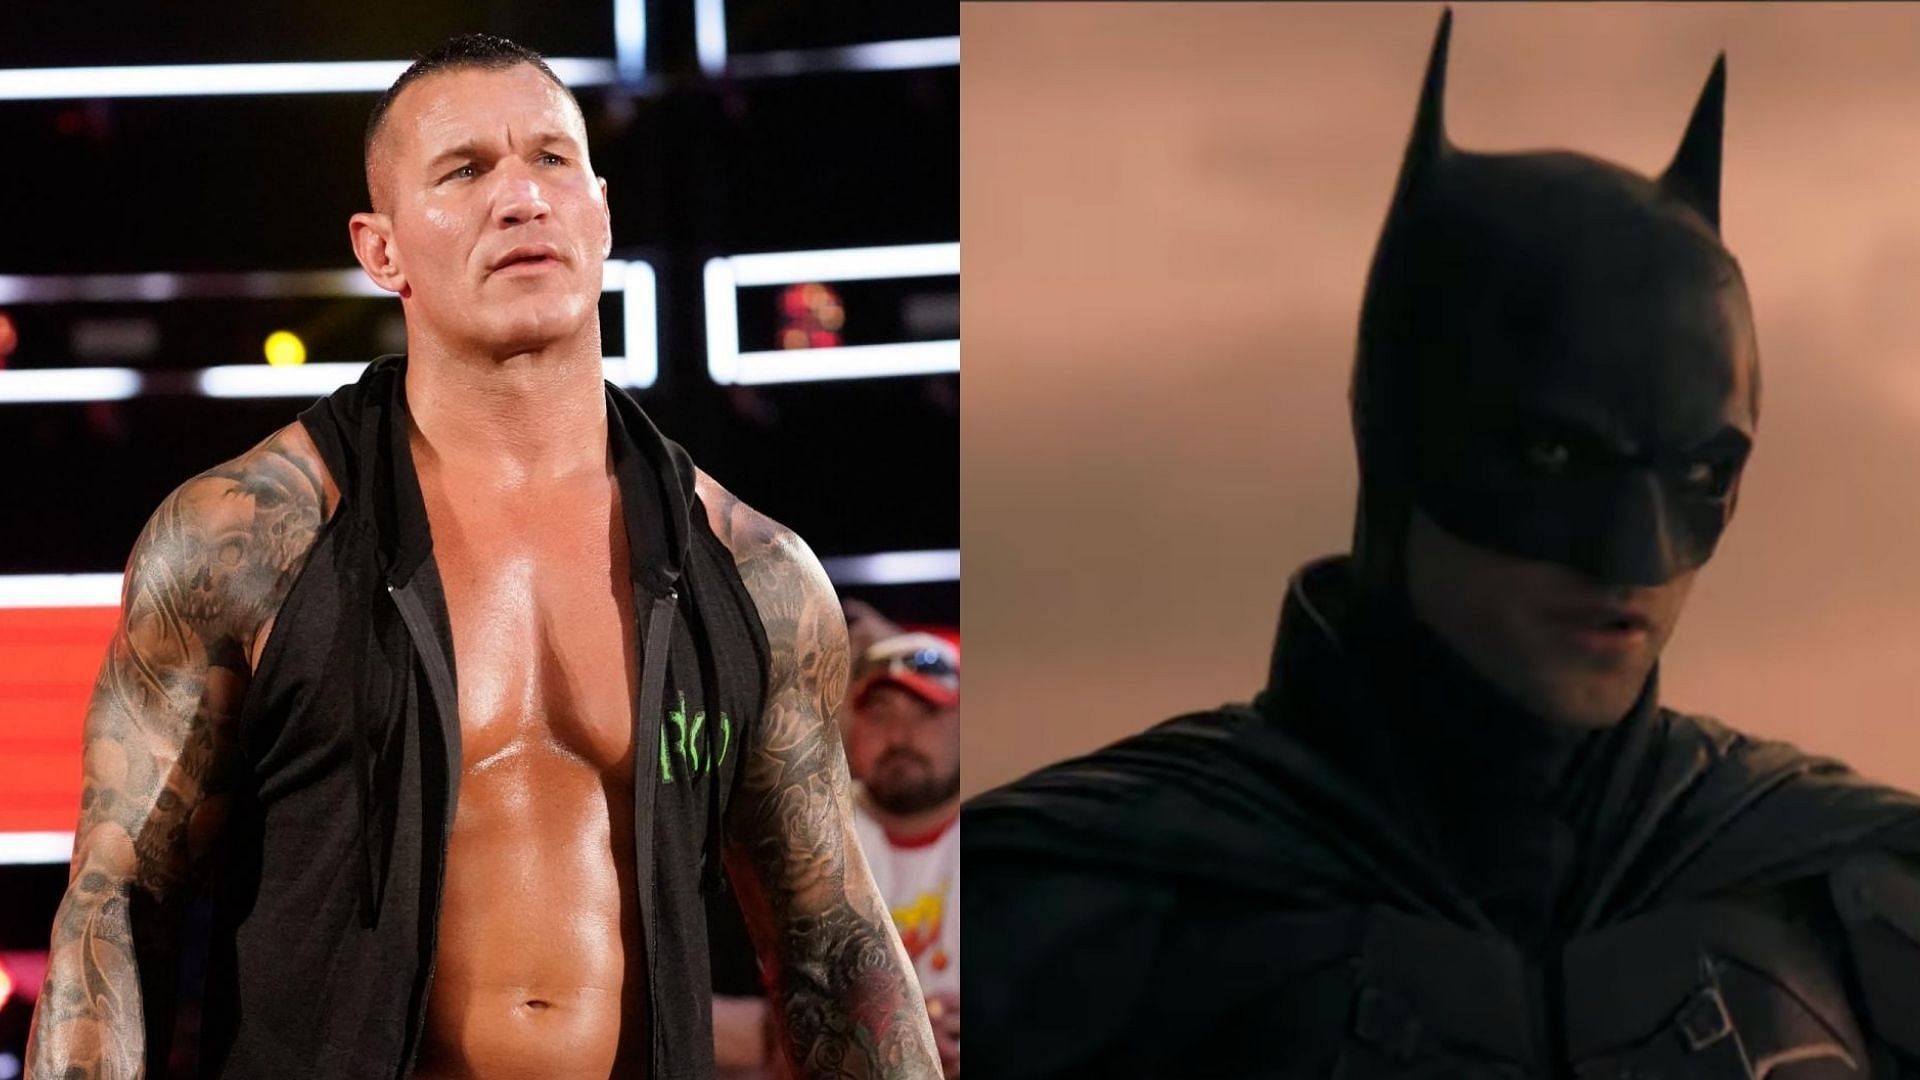 5 WWE legends who would have fit in The Batman universe